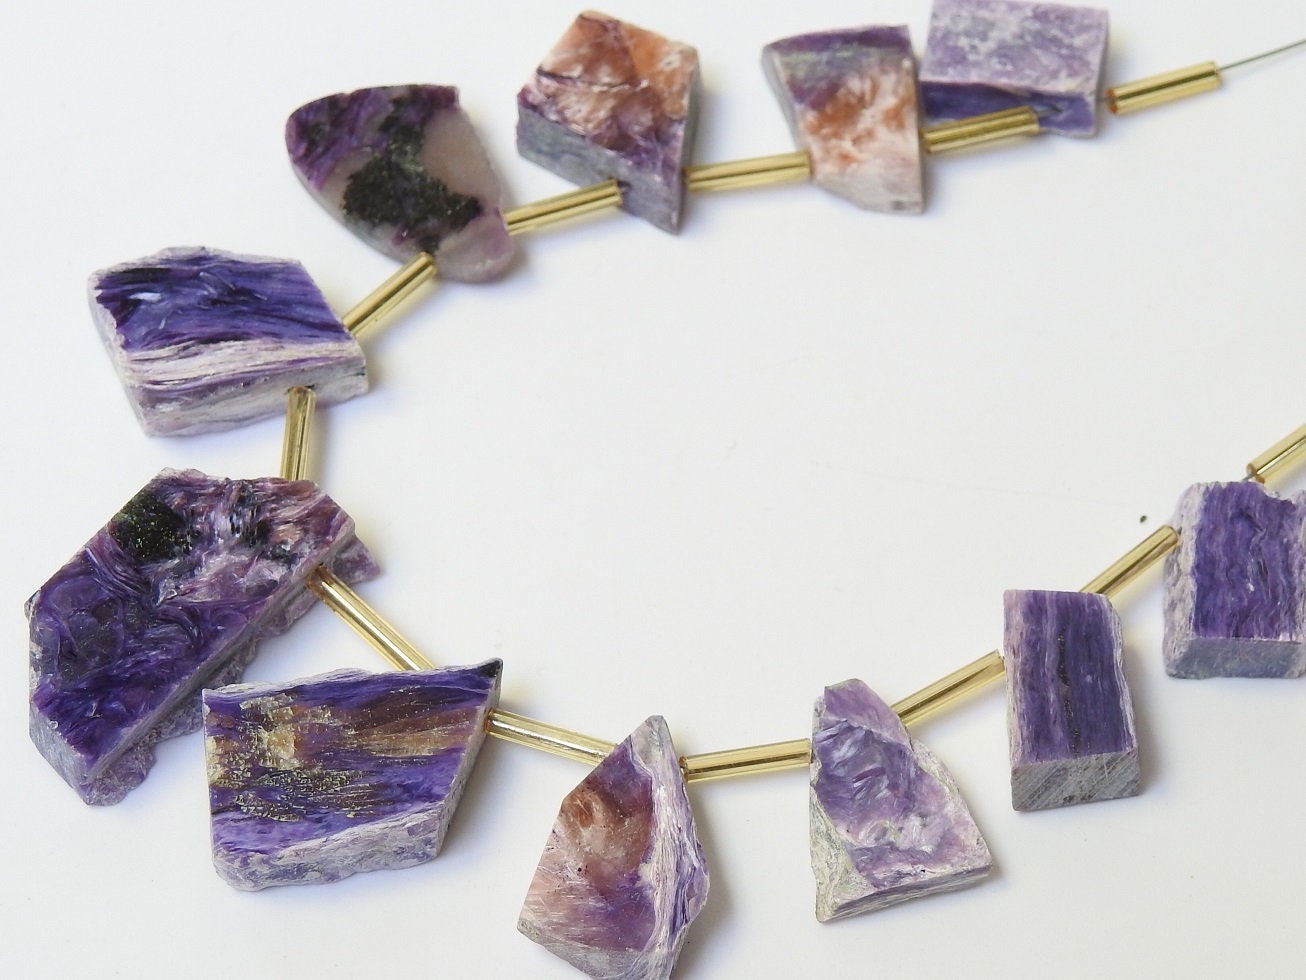 Charoite Polished Rough Slice,Slab,Stick,Loose Raw,11Piece Strand 24X11To12X12MM Approx,Wholesaler,Supplies,100%Natural PME-R4 | Save 33% - Rajasthan Living 20